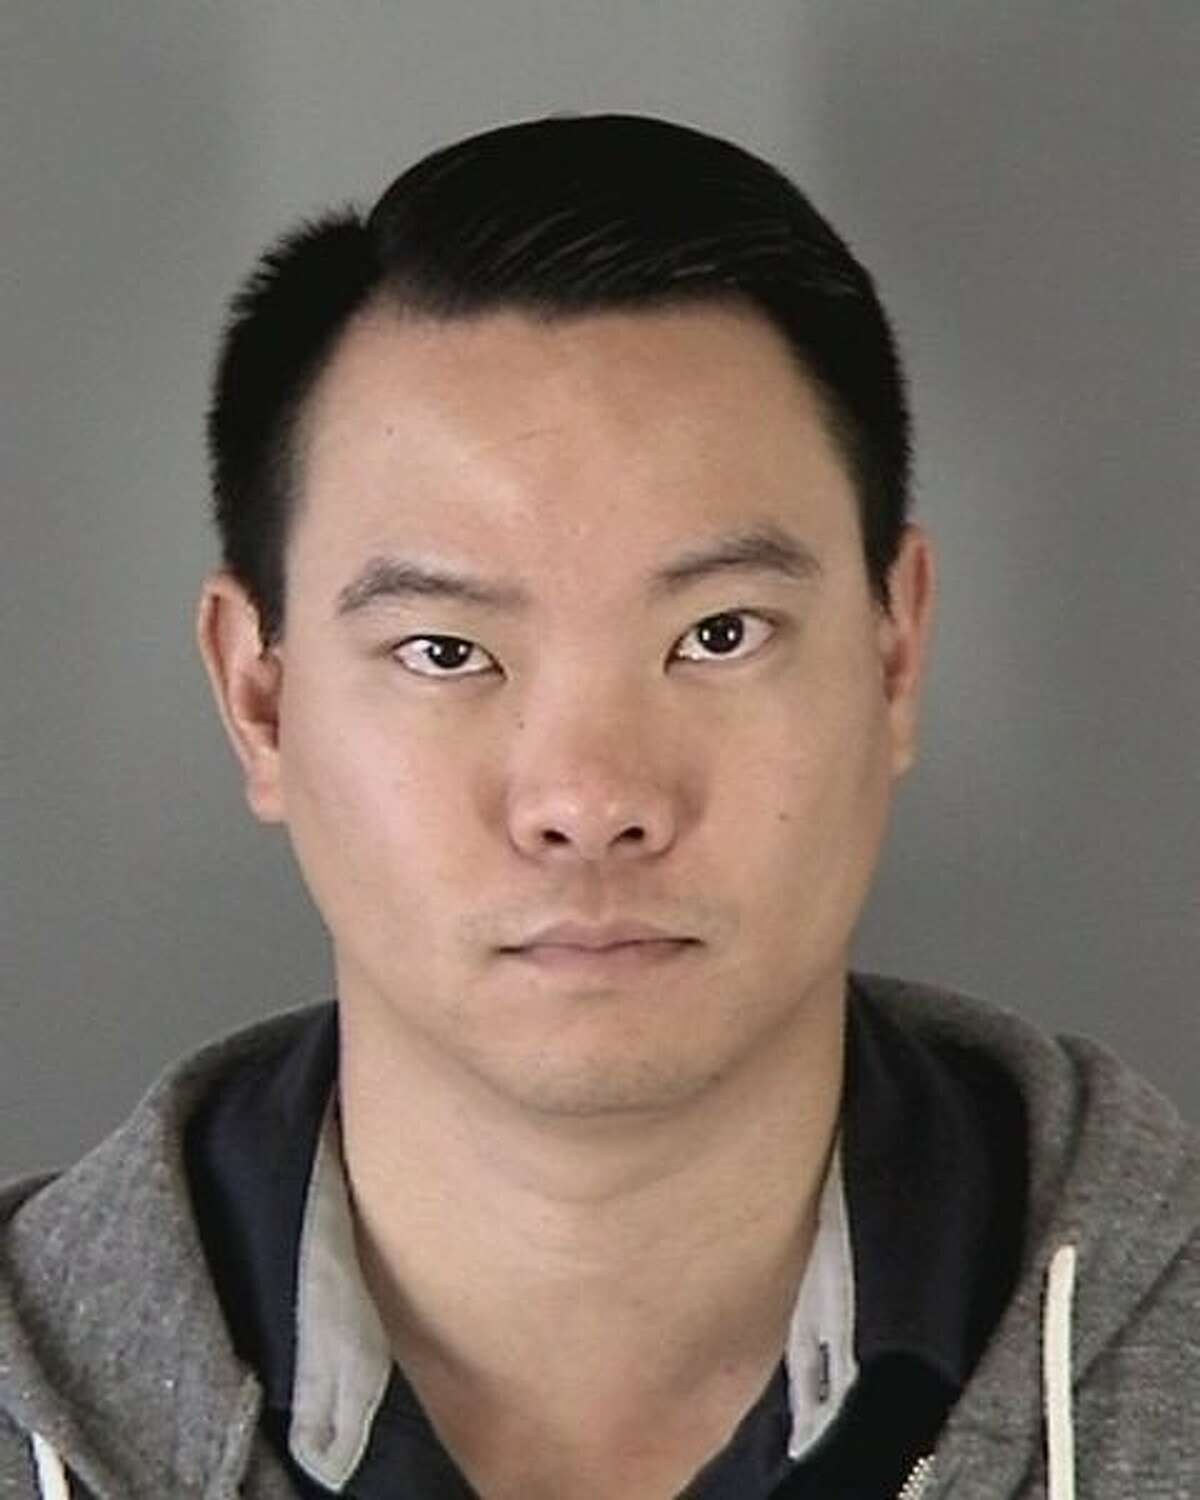 Officer Jason Lai sent questionable texts to several officers, an investigation found.